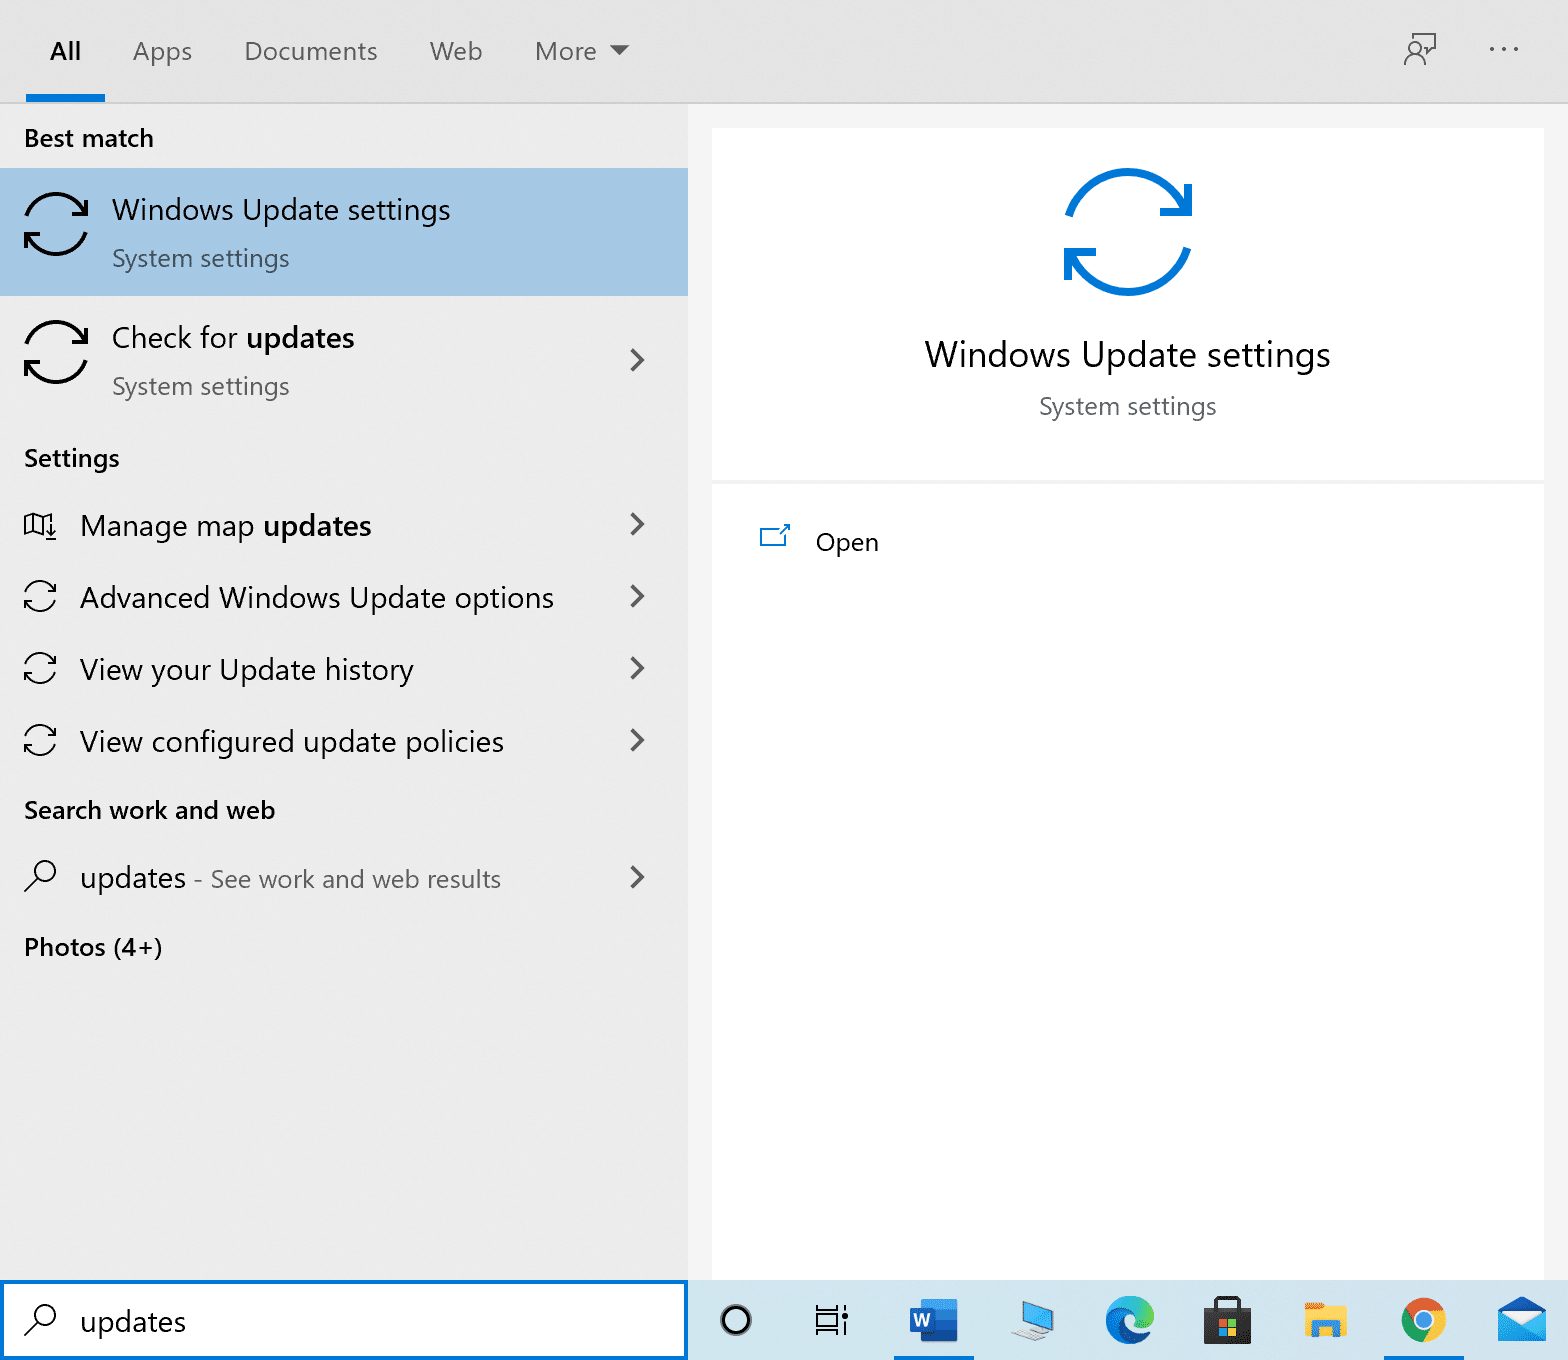 launch windows update settings from windows search